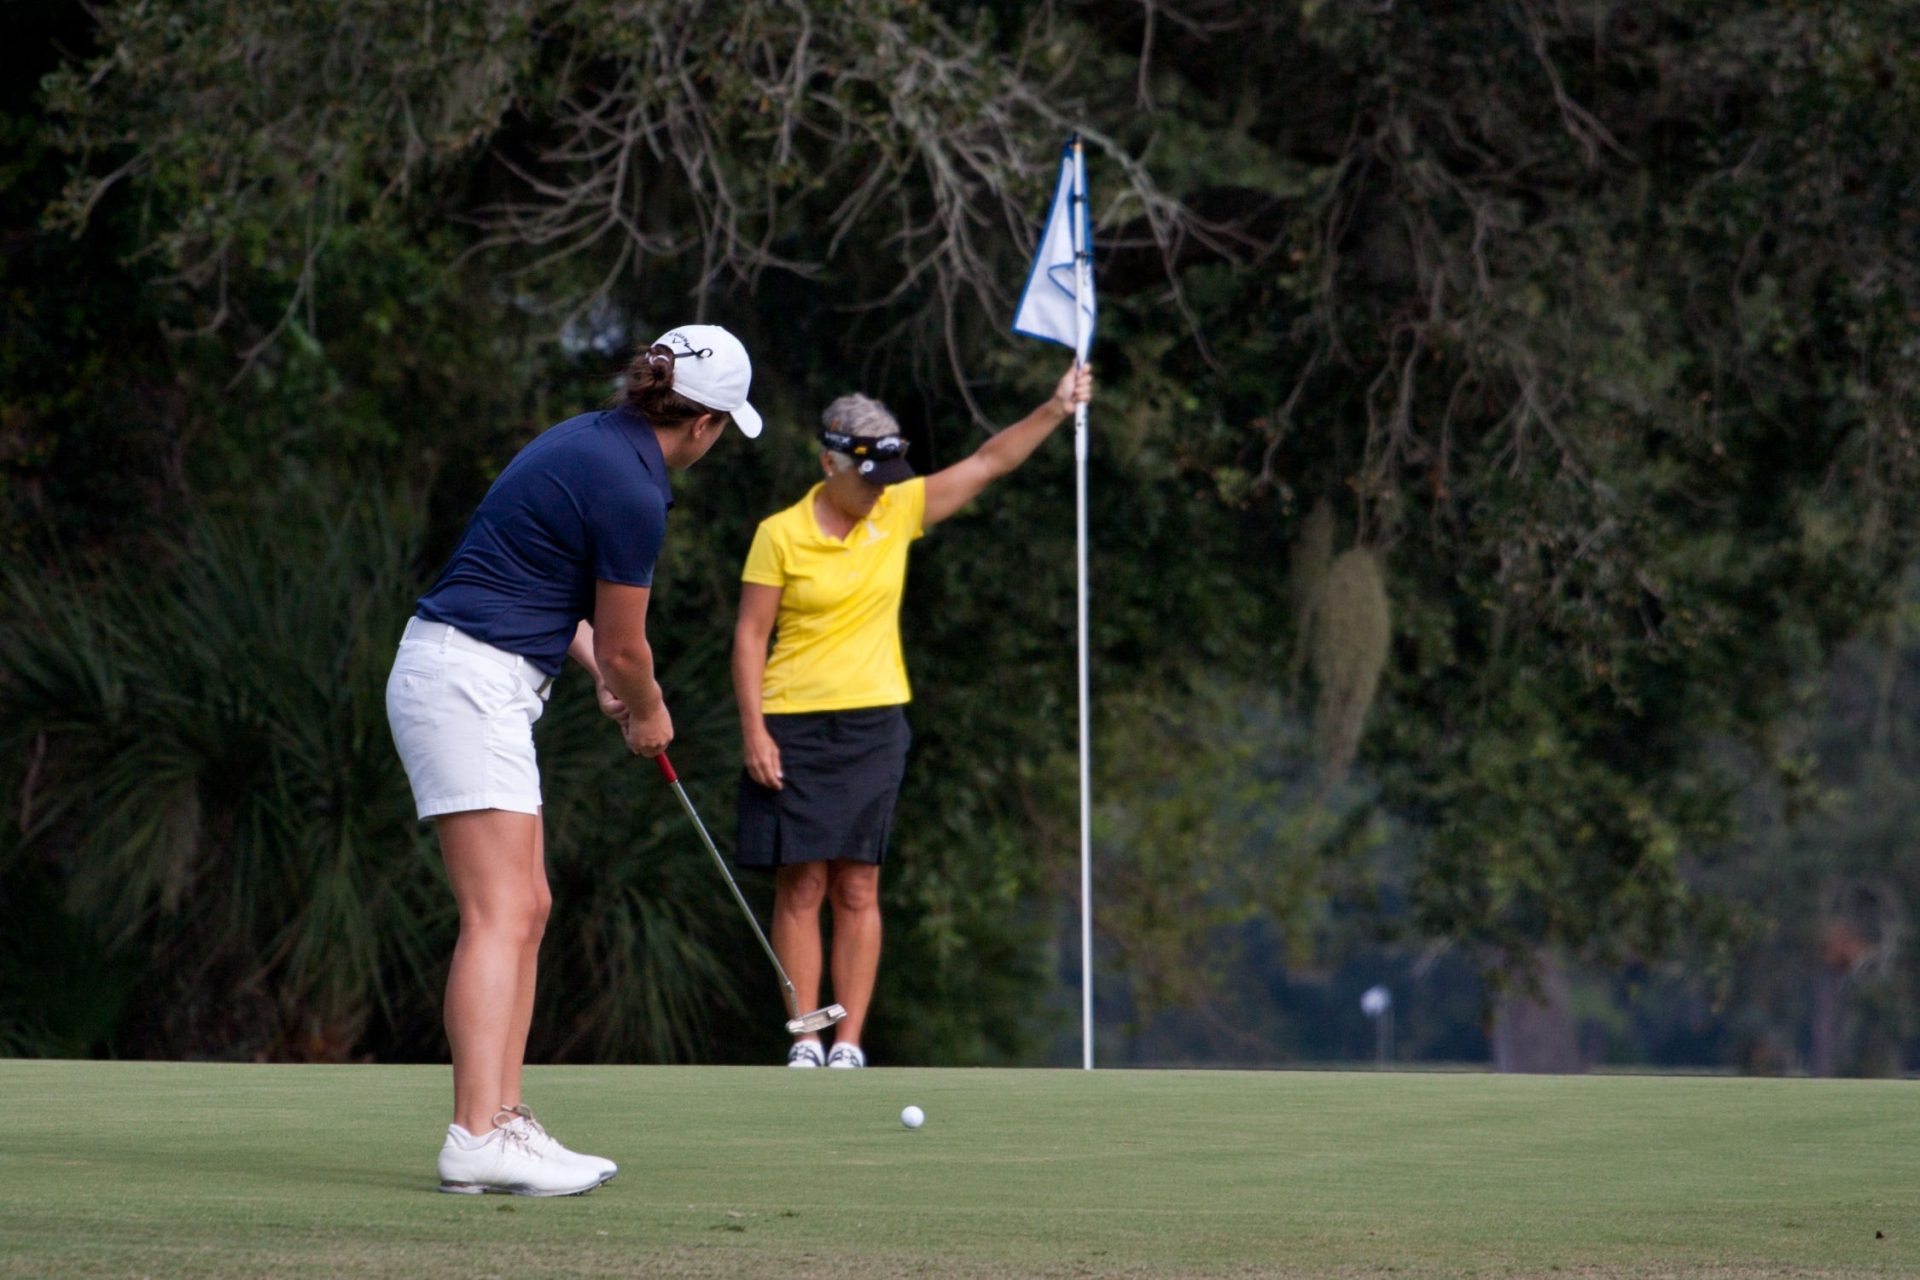 two women playing golf together